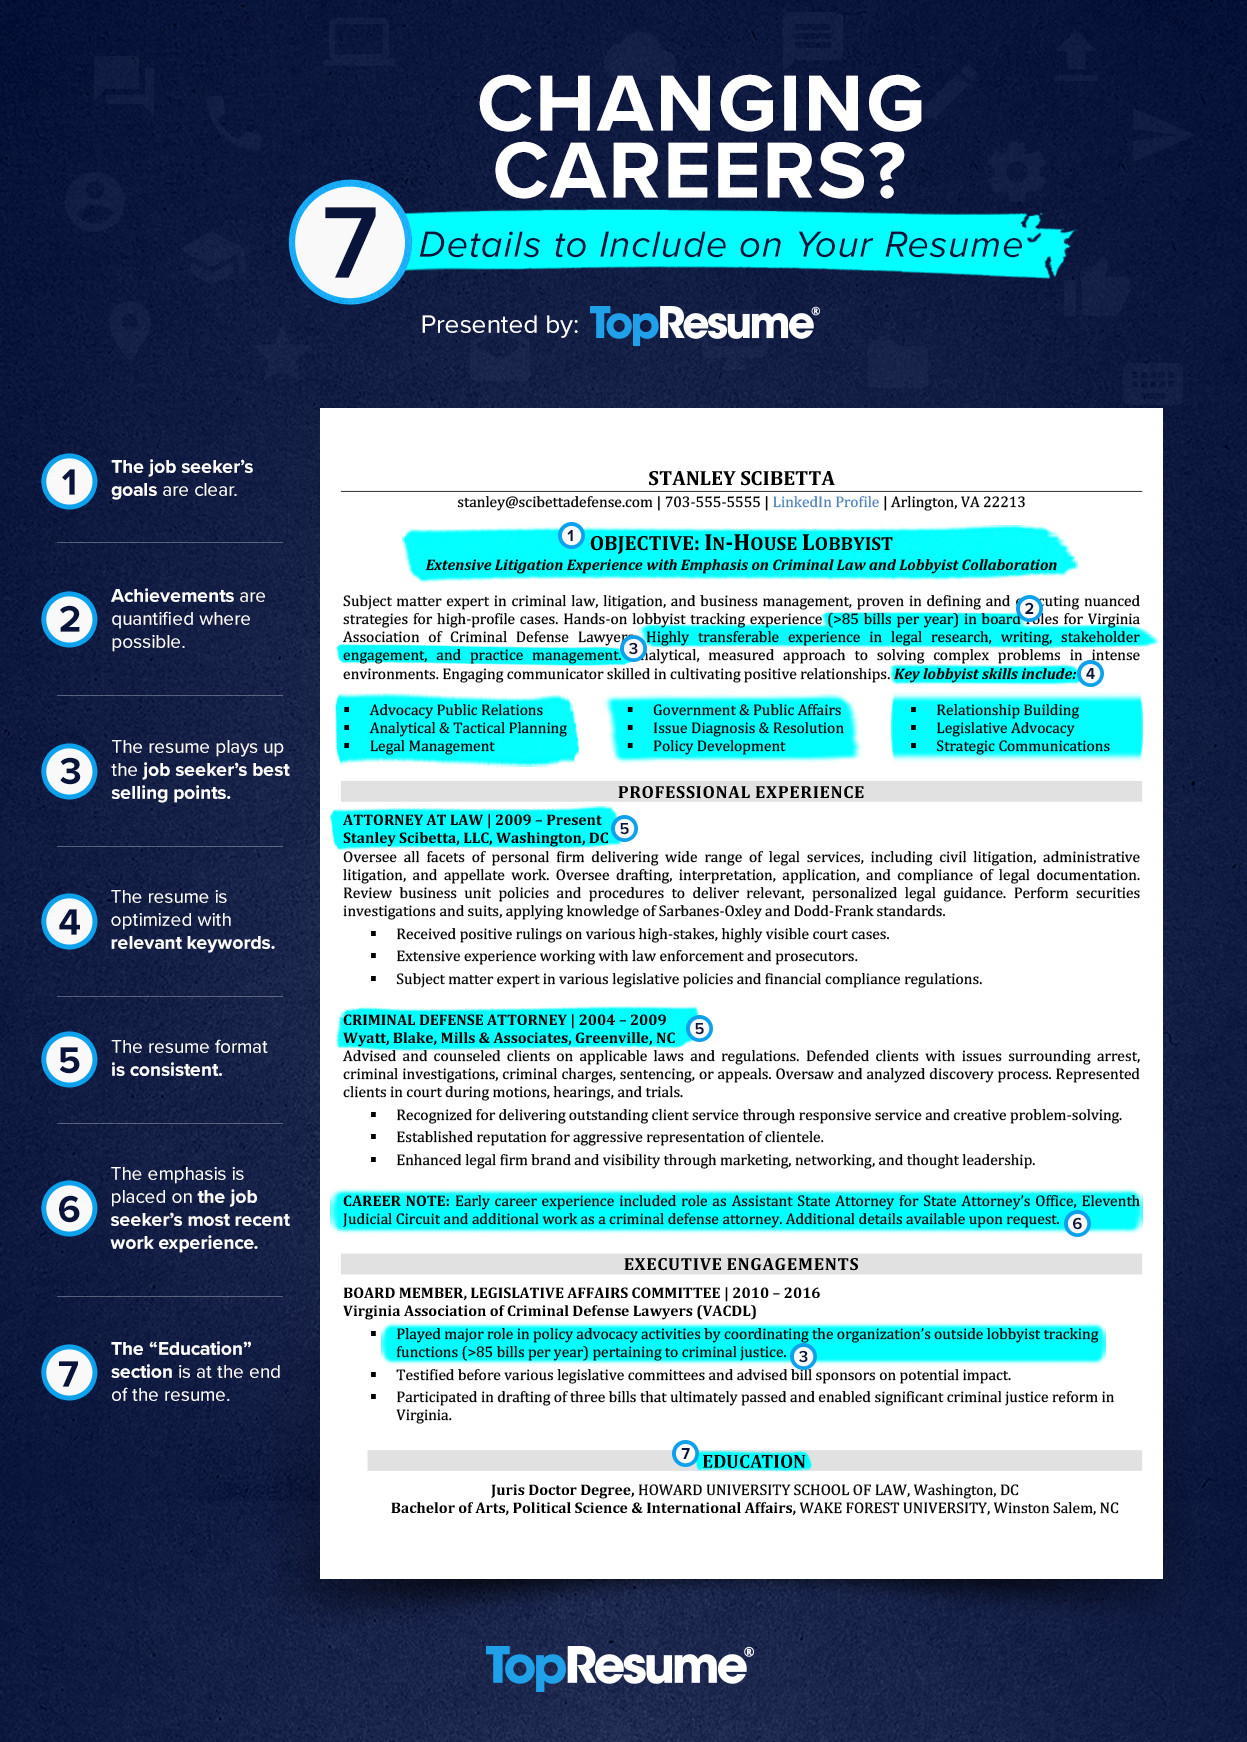 Change In Career Resume Profile Sample Changing Careers? 7 Details to Include On Your Resume topresume